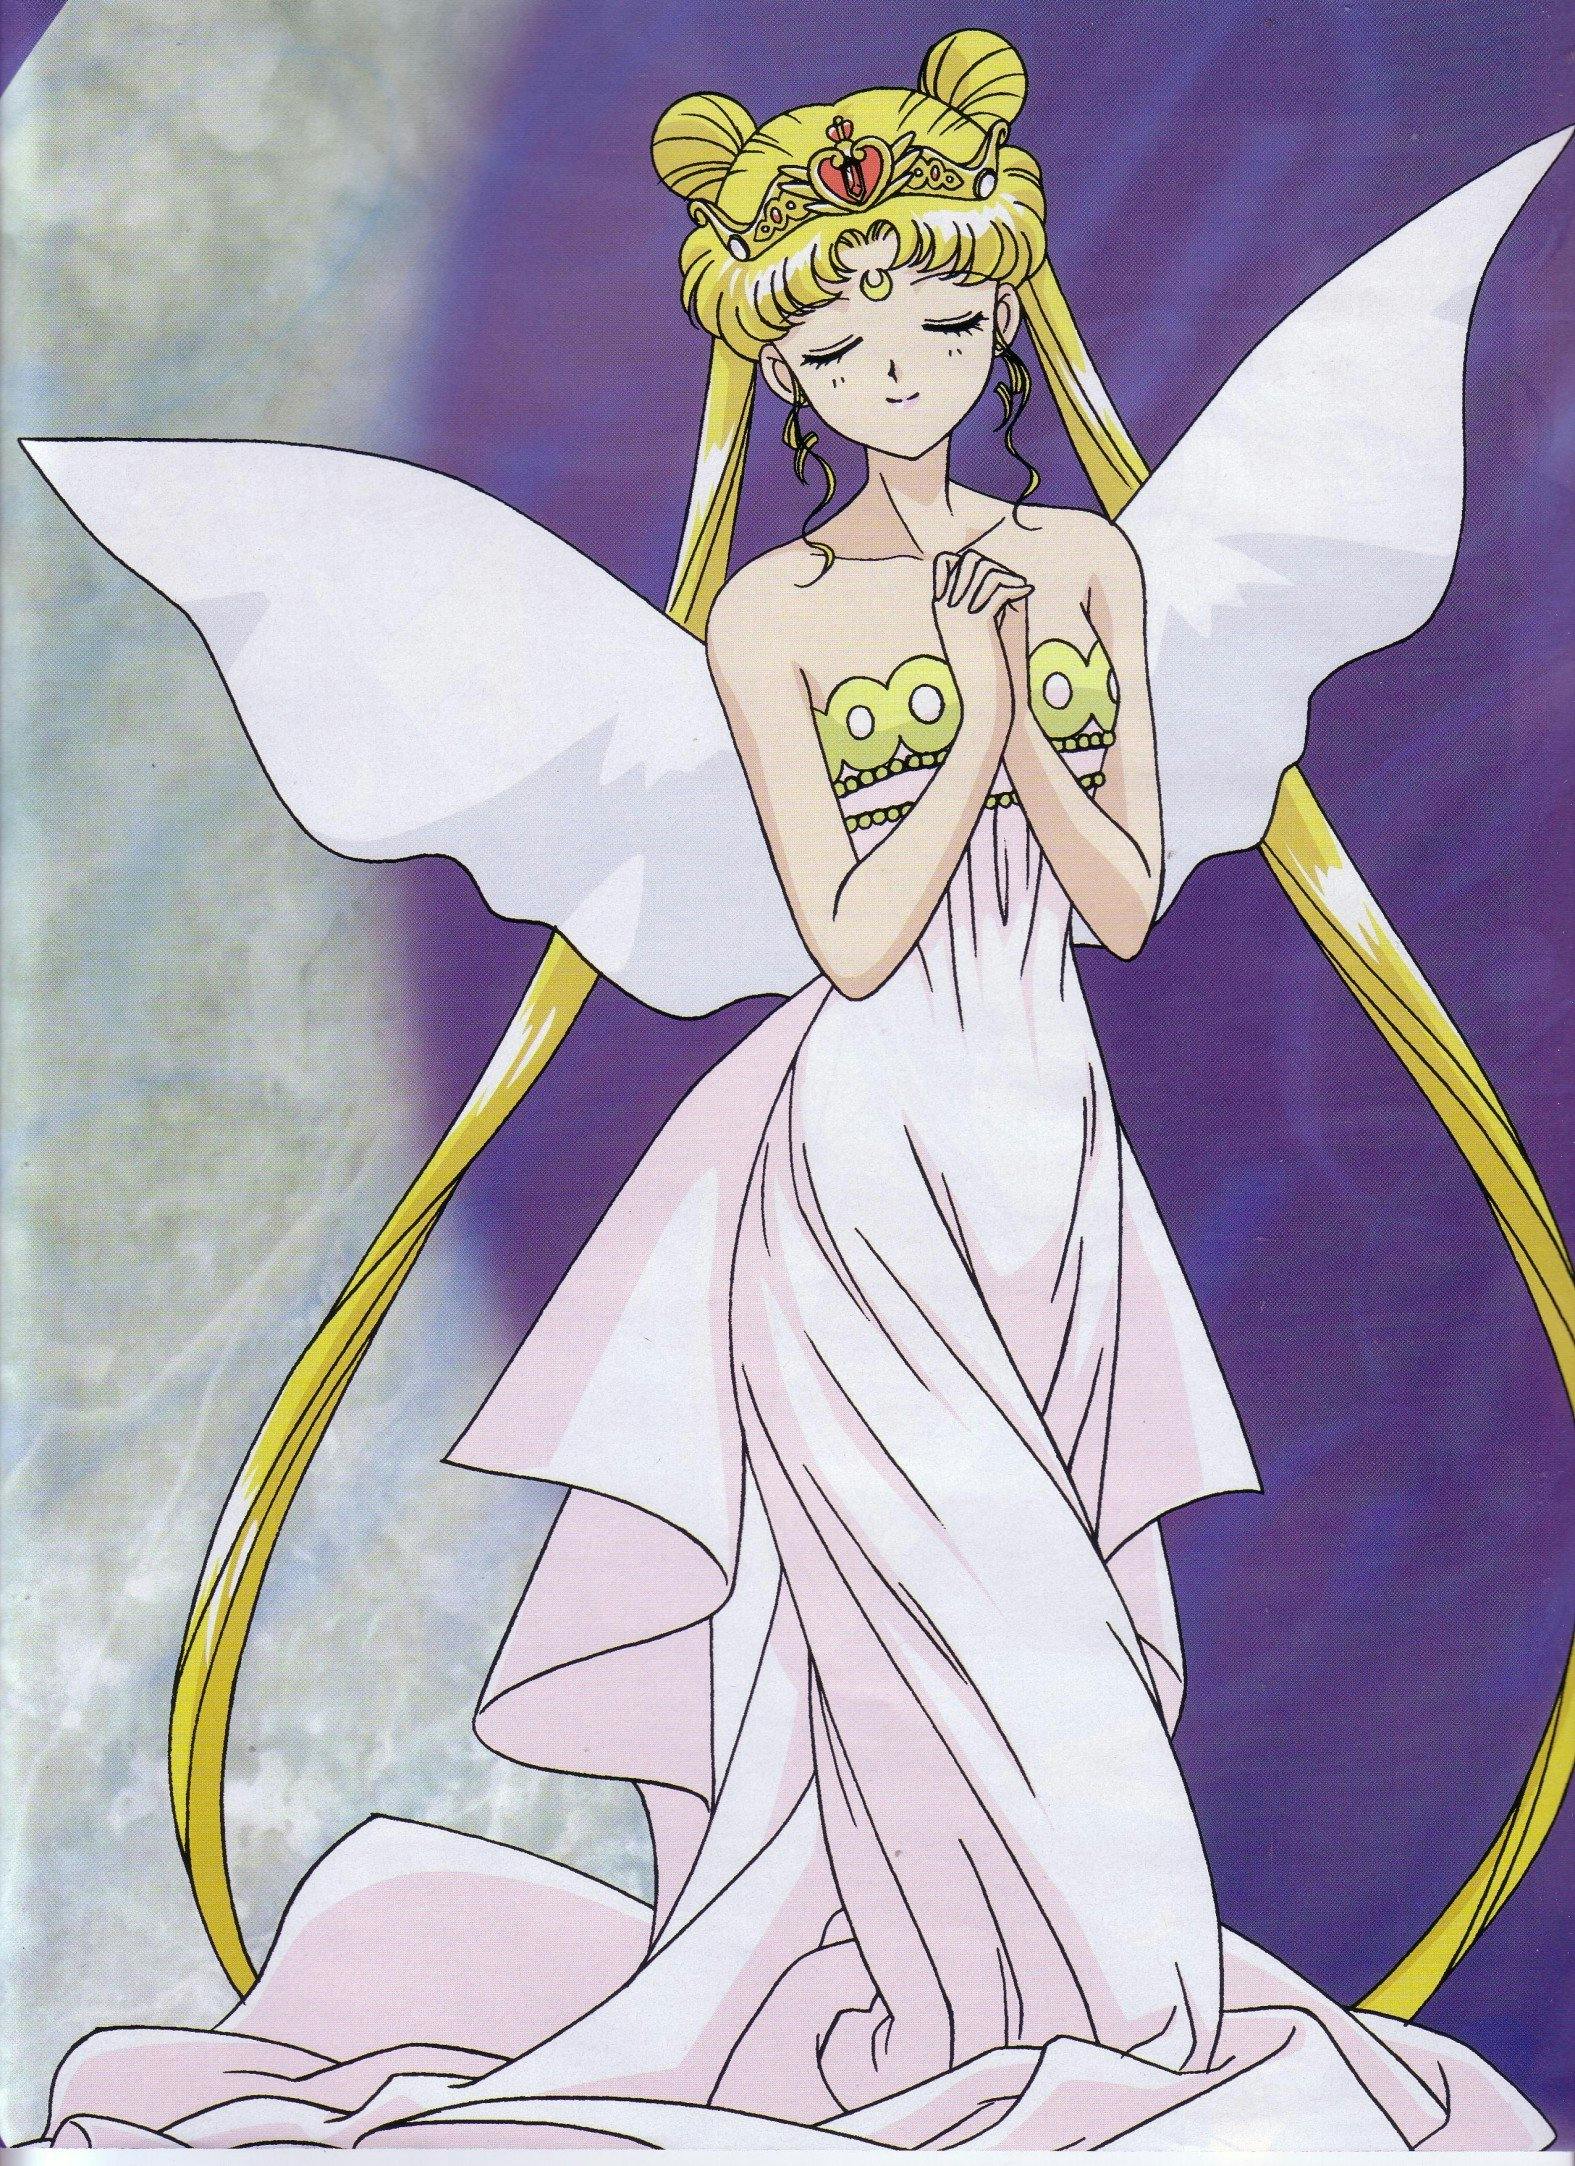 Neo queen serenity with wings and white flowy dress with her eyes closed praying